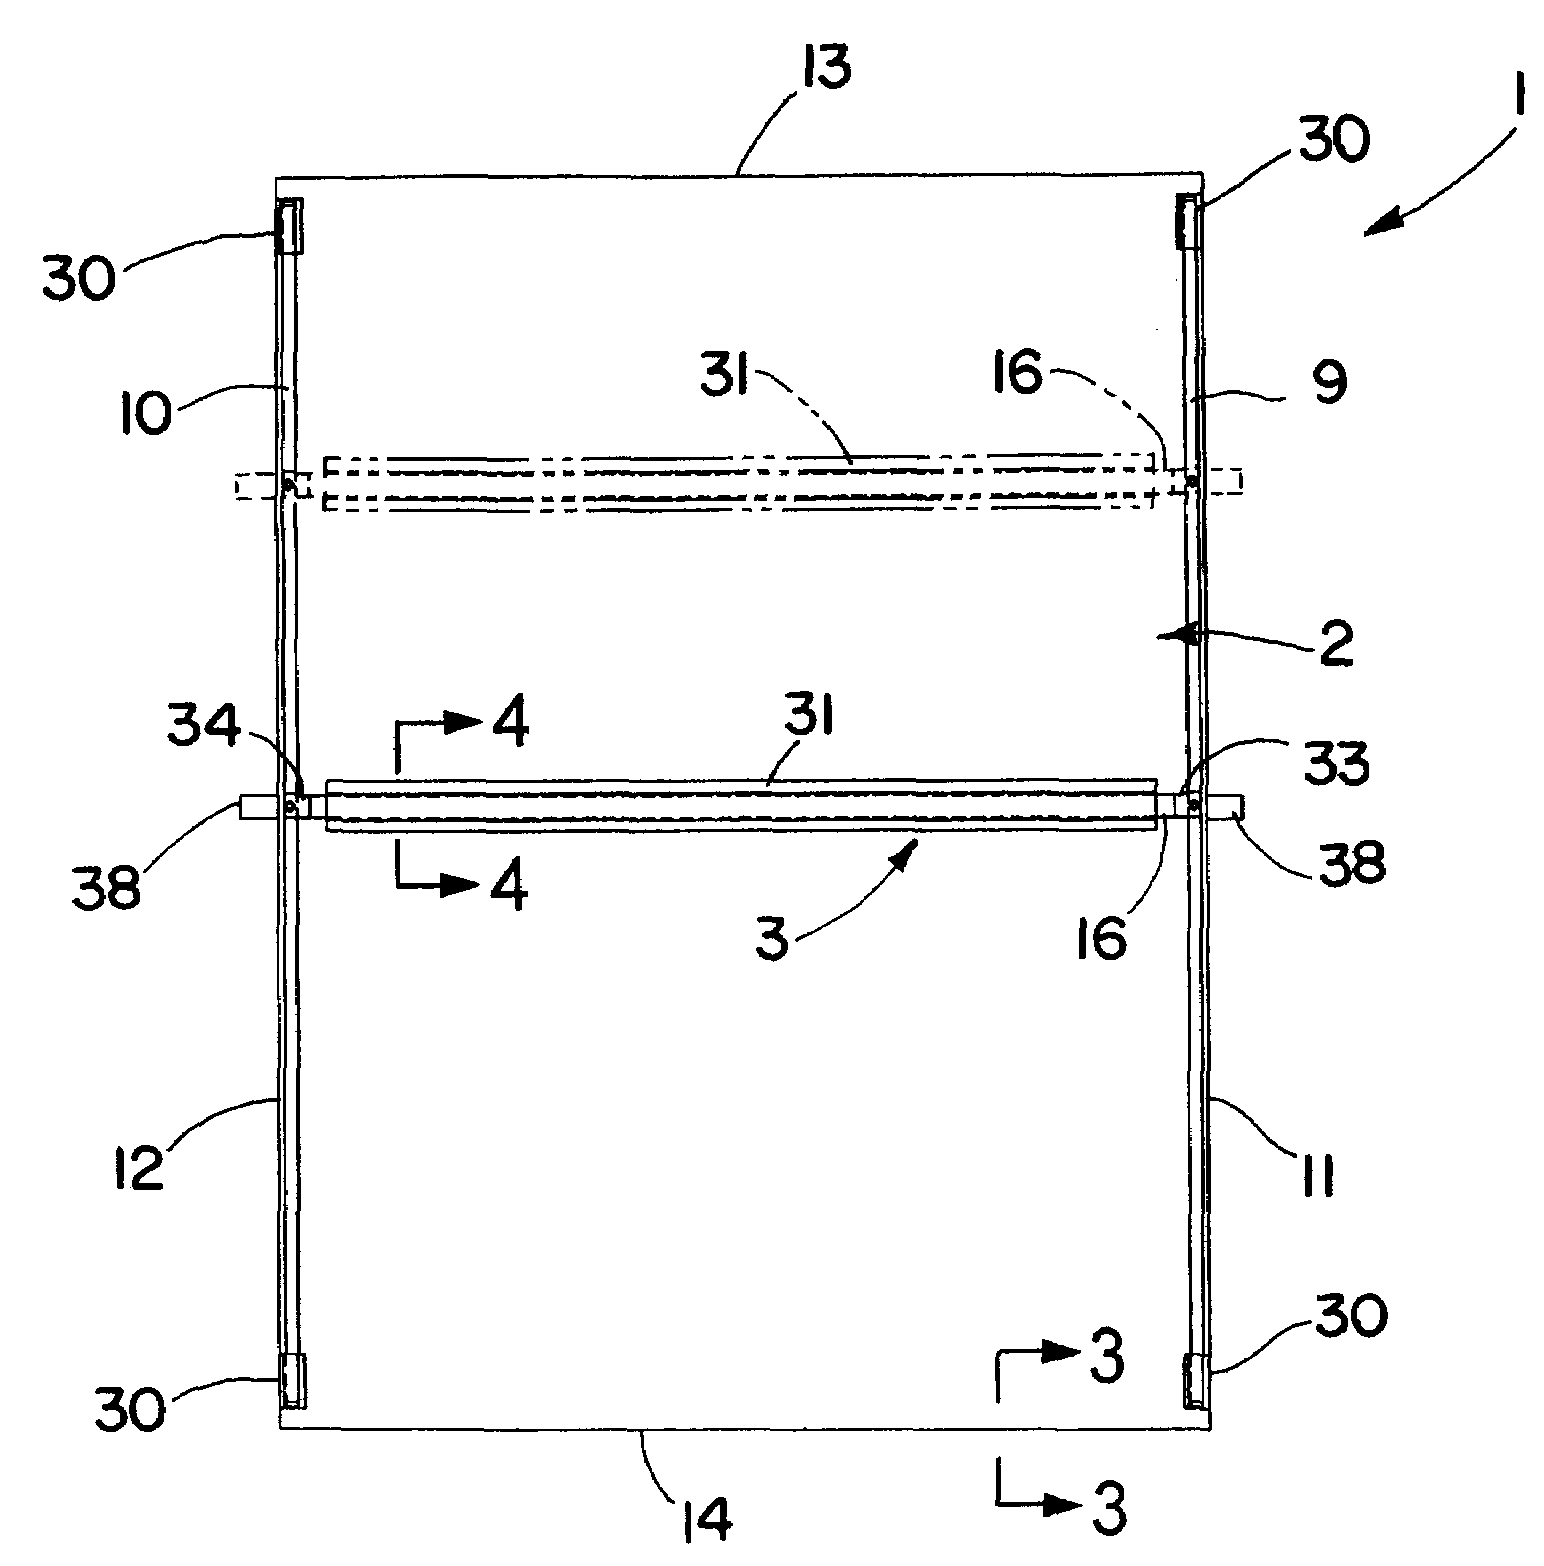 Drop cloth systems and methods of using same